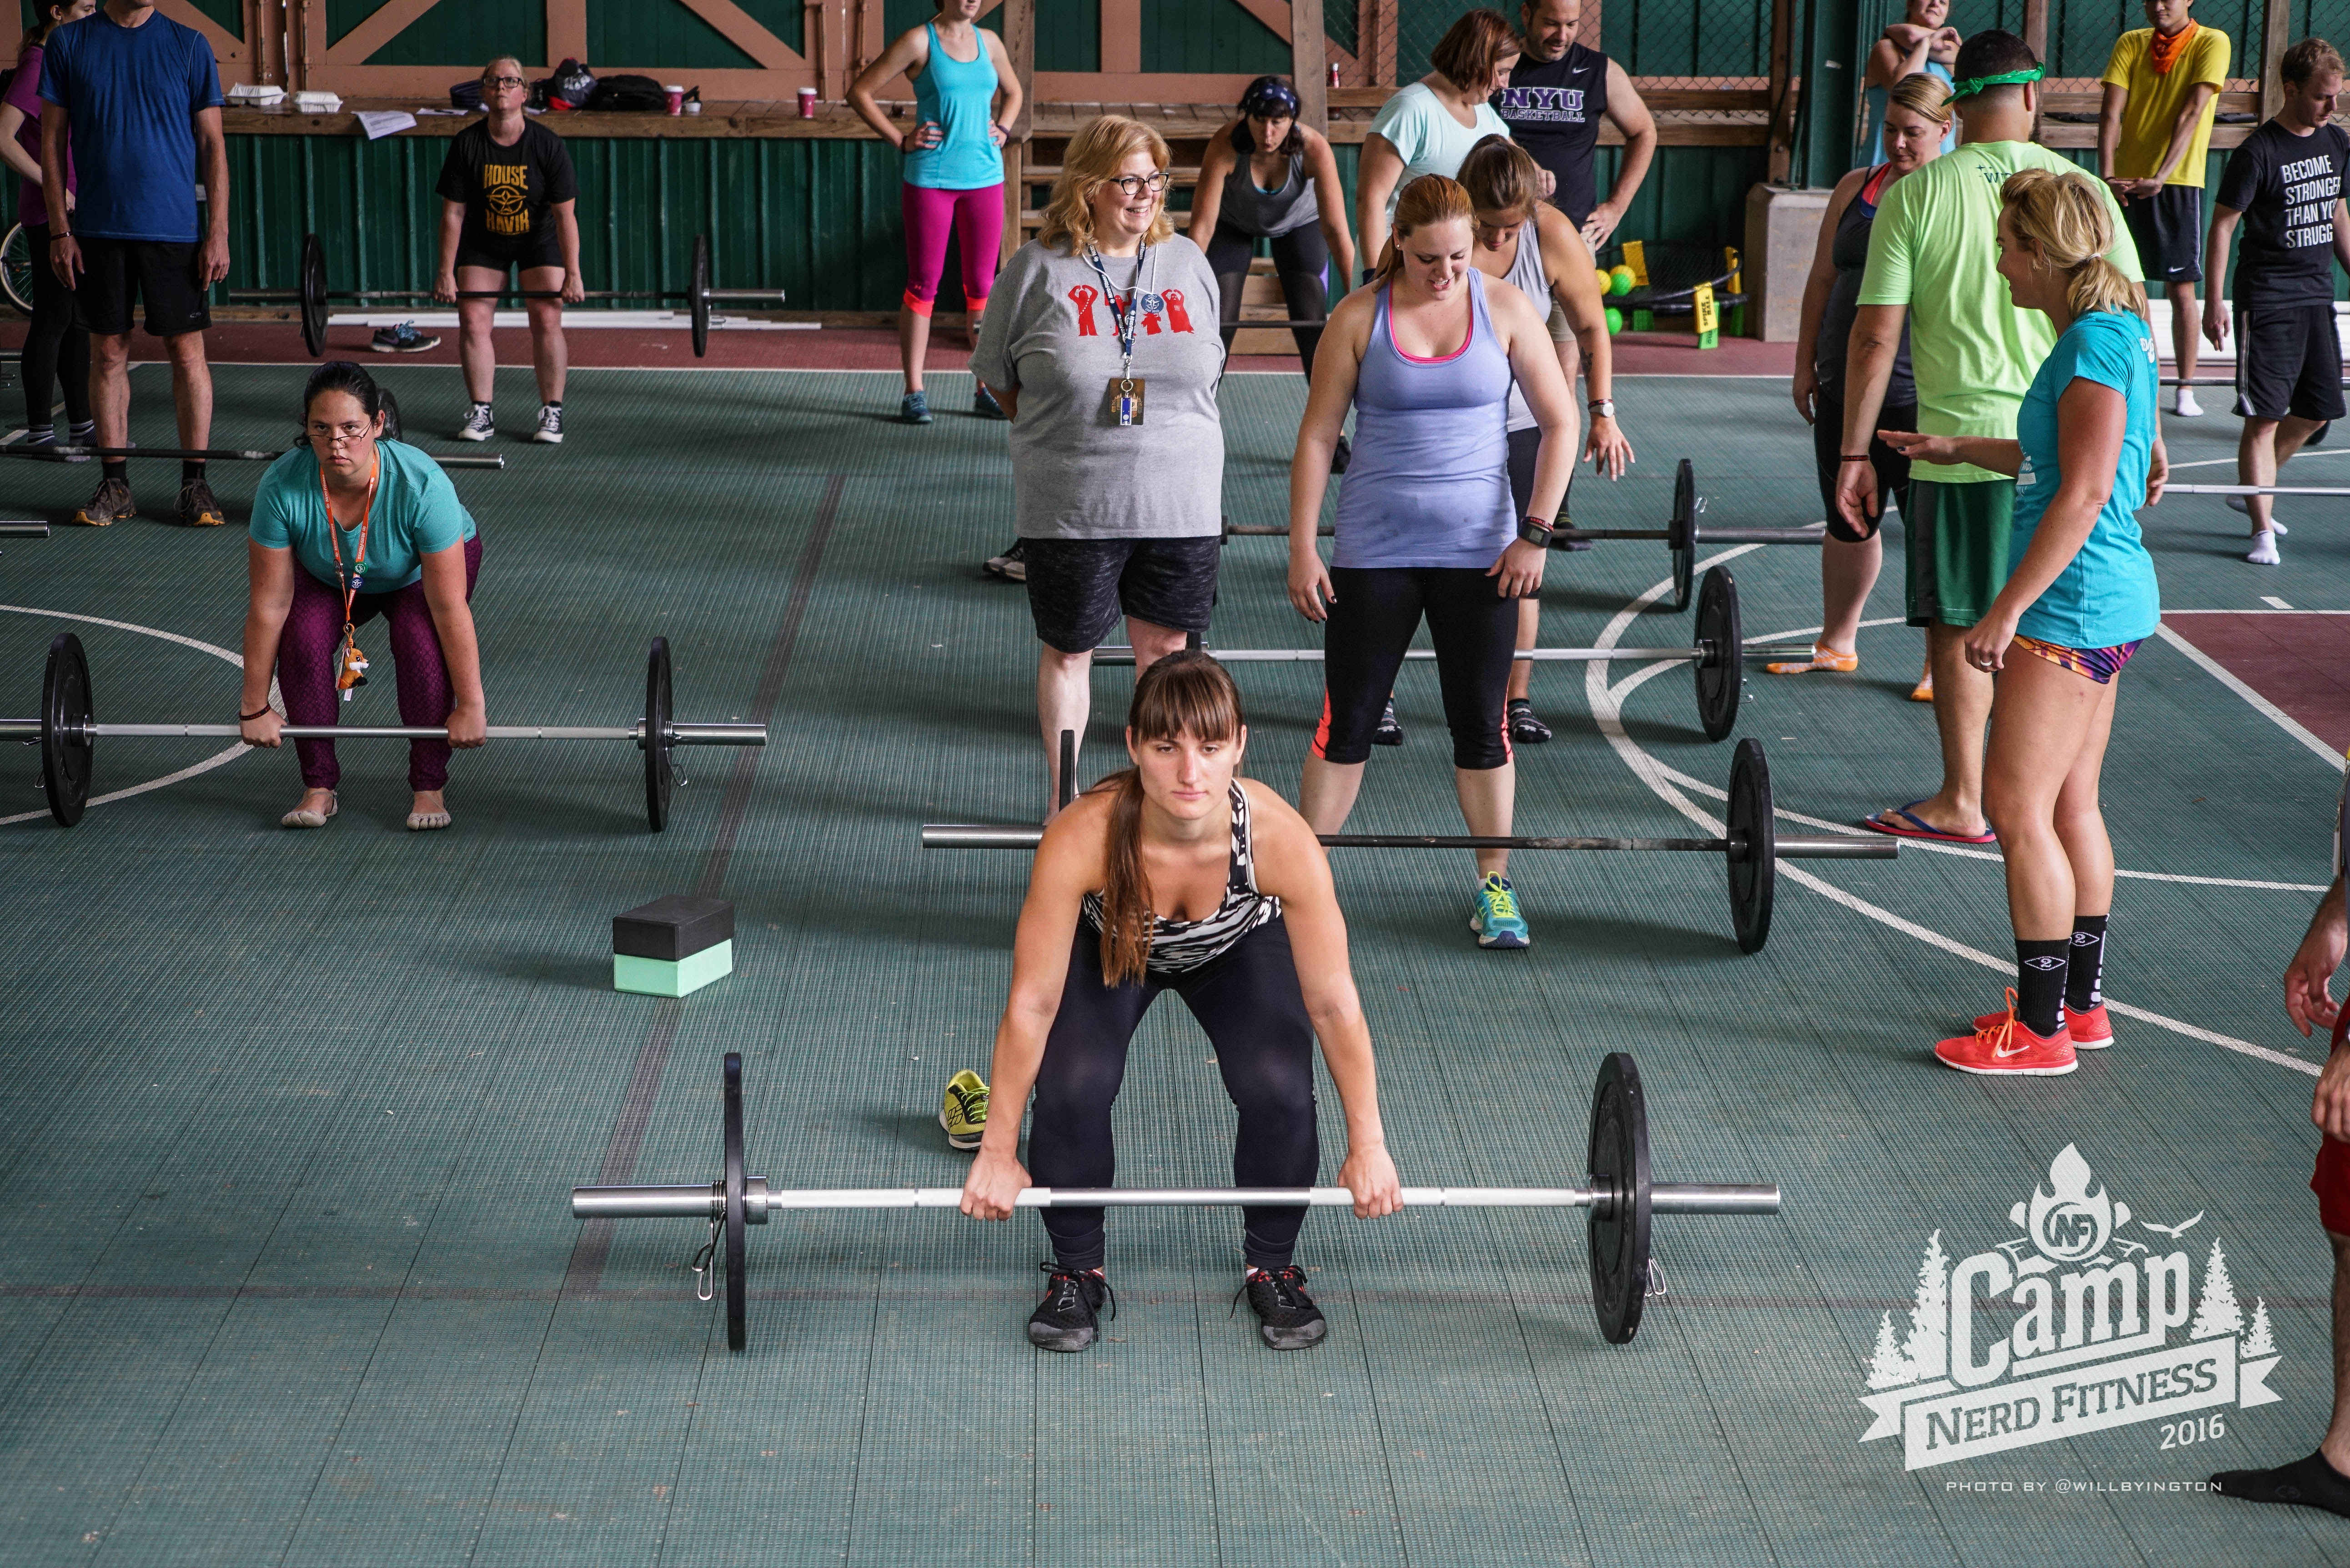 Barbell training is very important, which is why we covered it at camp!